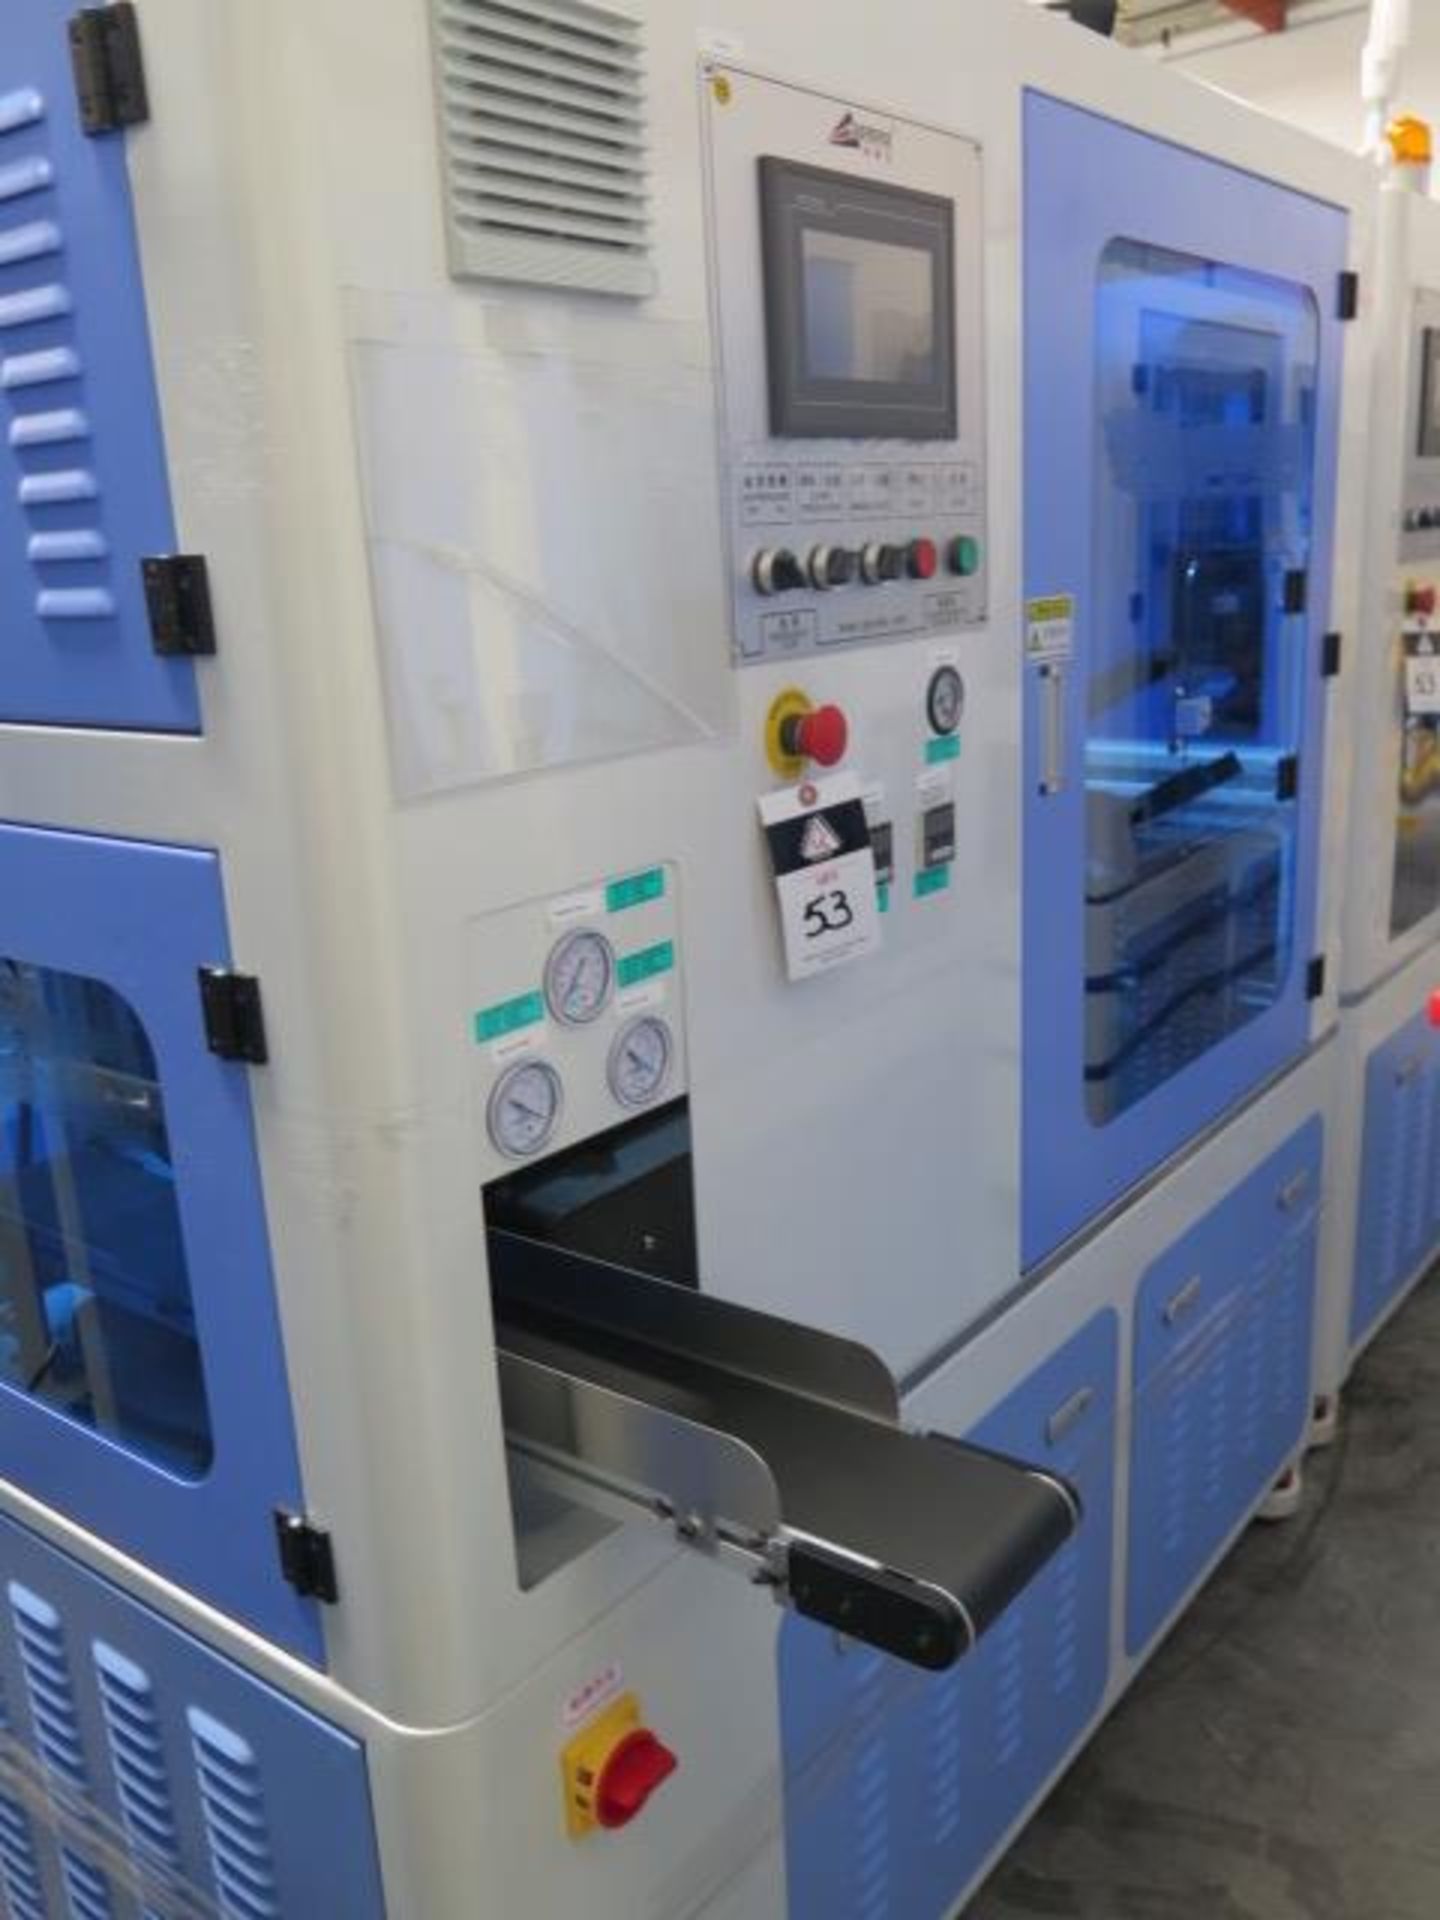 3/2021 Gereke mdl. GRK-TWO1 Cassette Assembly and Packaging Line s/n GRK20210305075, SOLD AS IS - Bild 3 aus 31